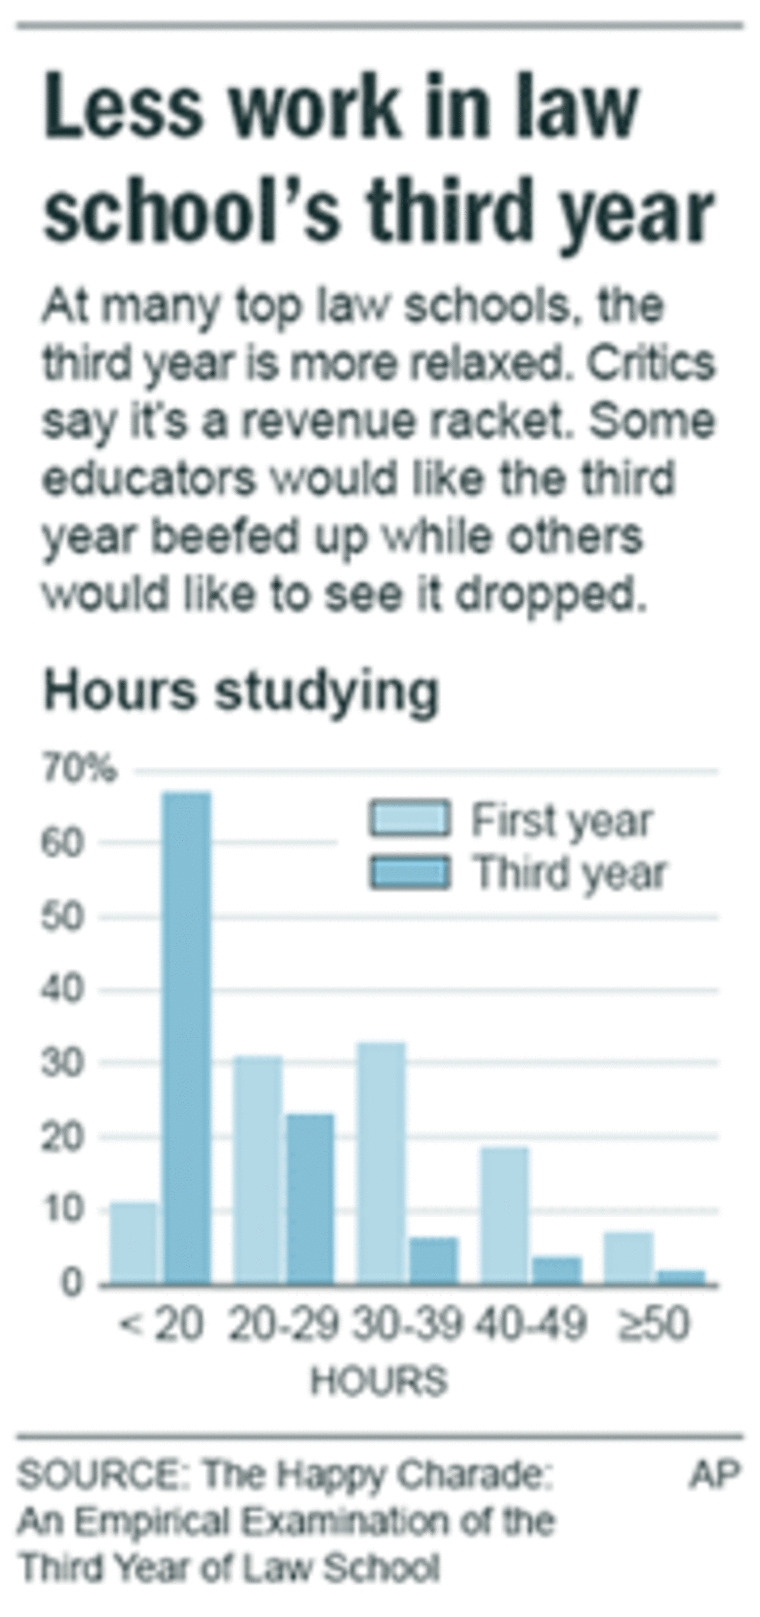 With eased workload, some wonder whether third year of law school is worth it